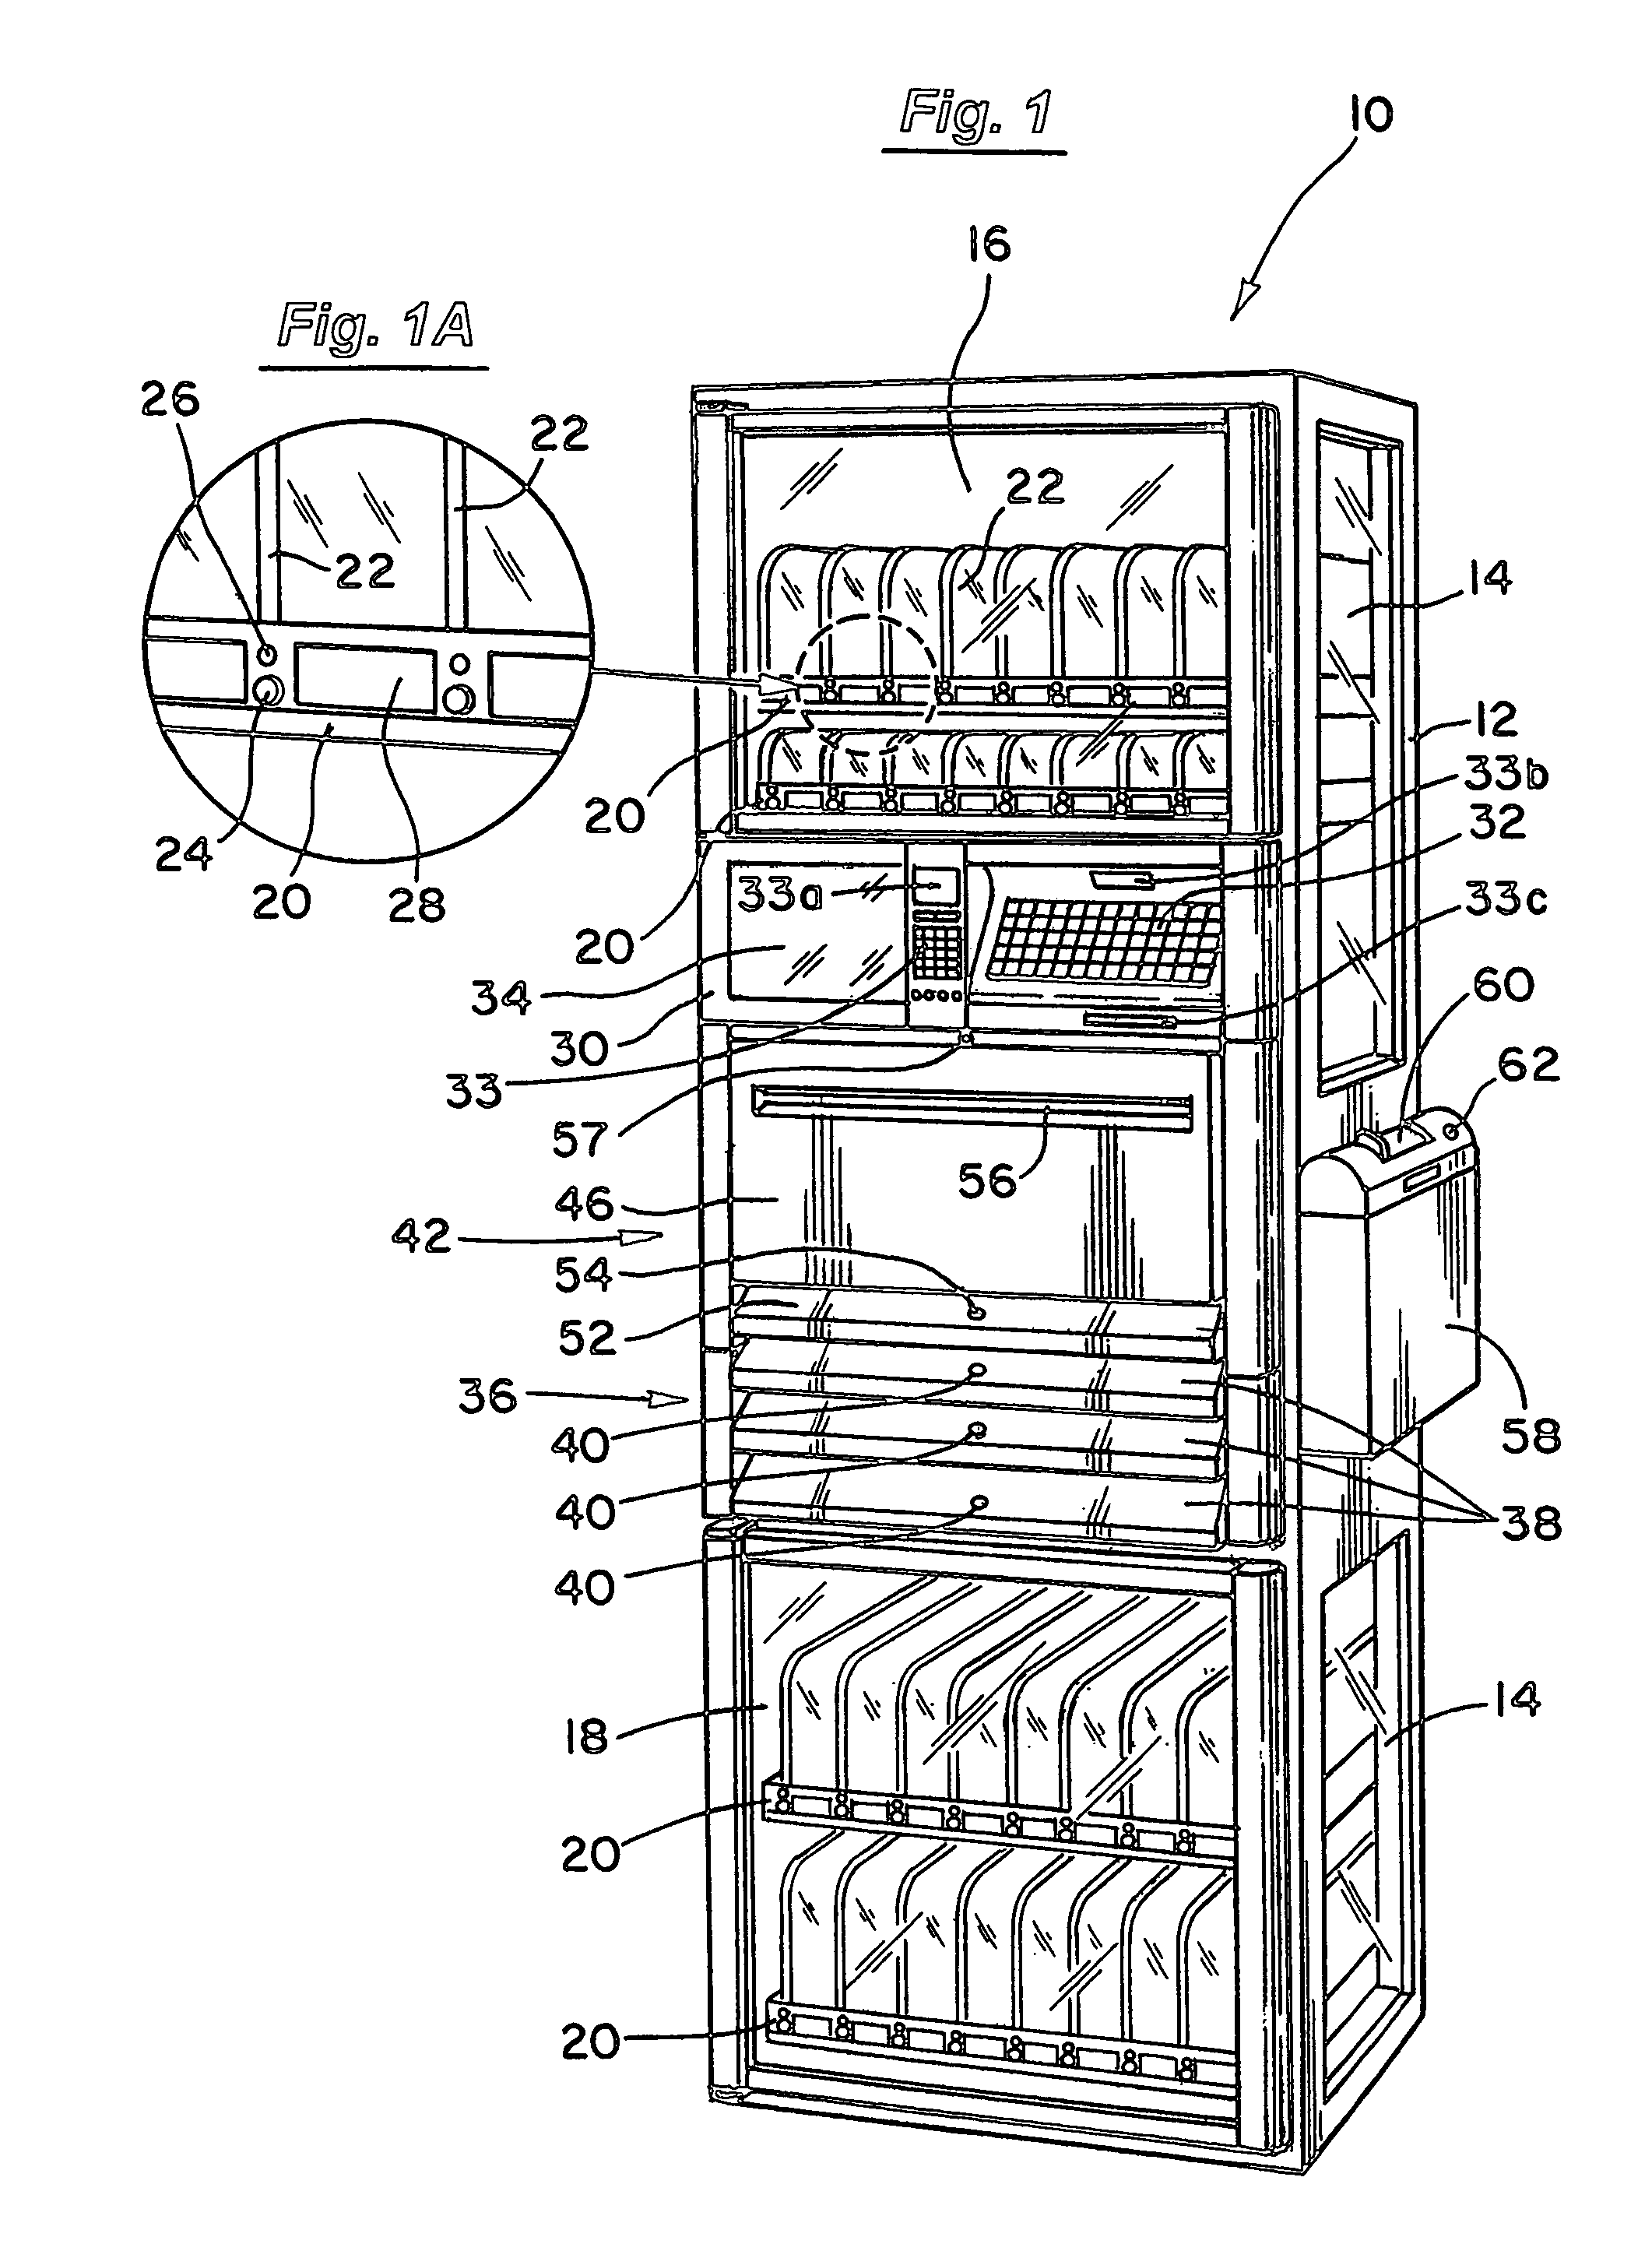 Secured dispensing cabinet and methods